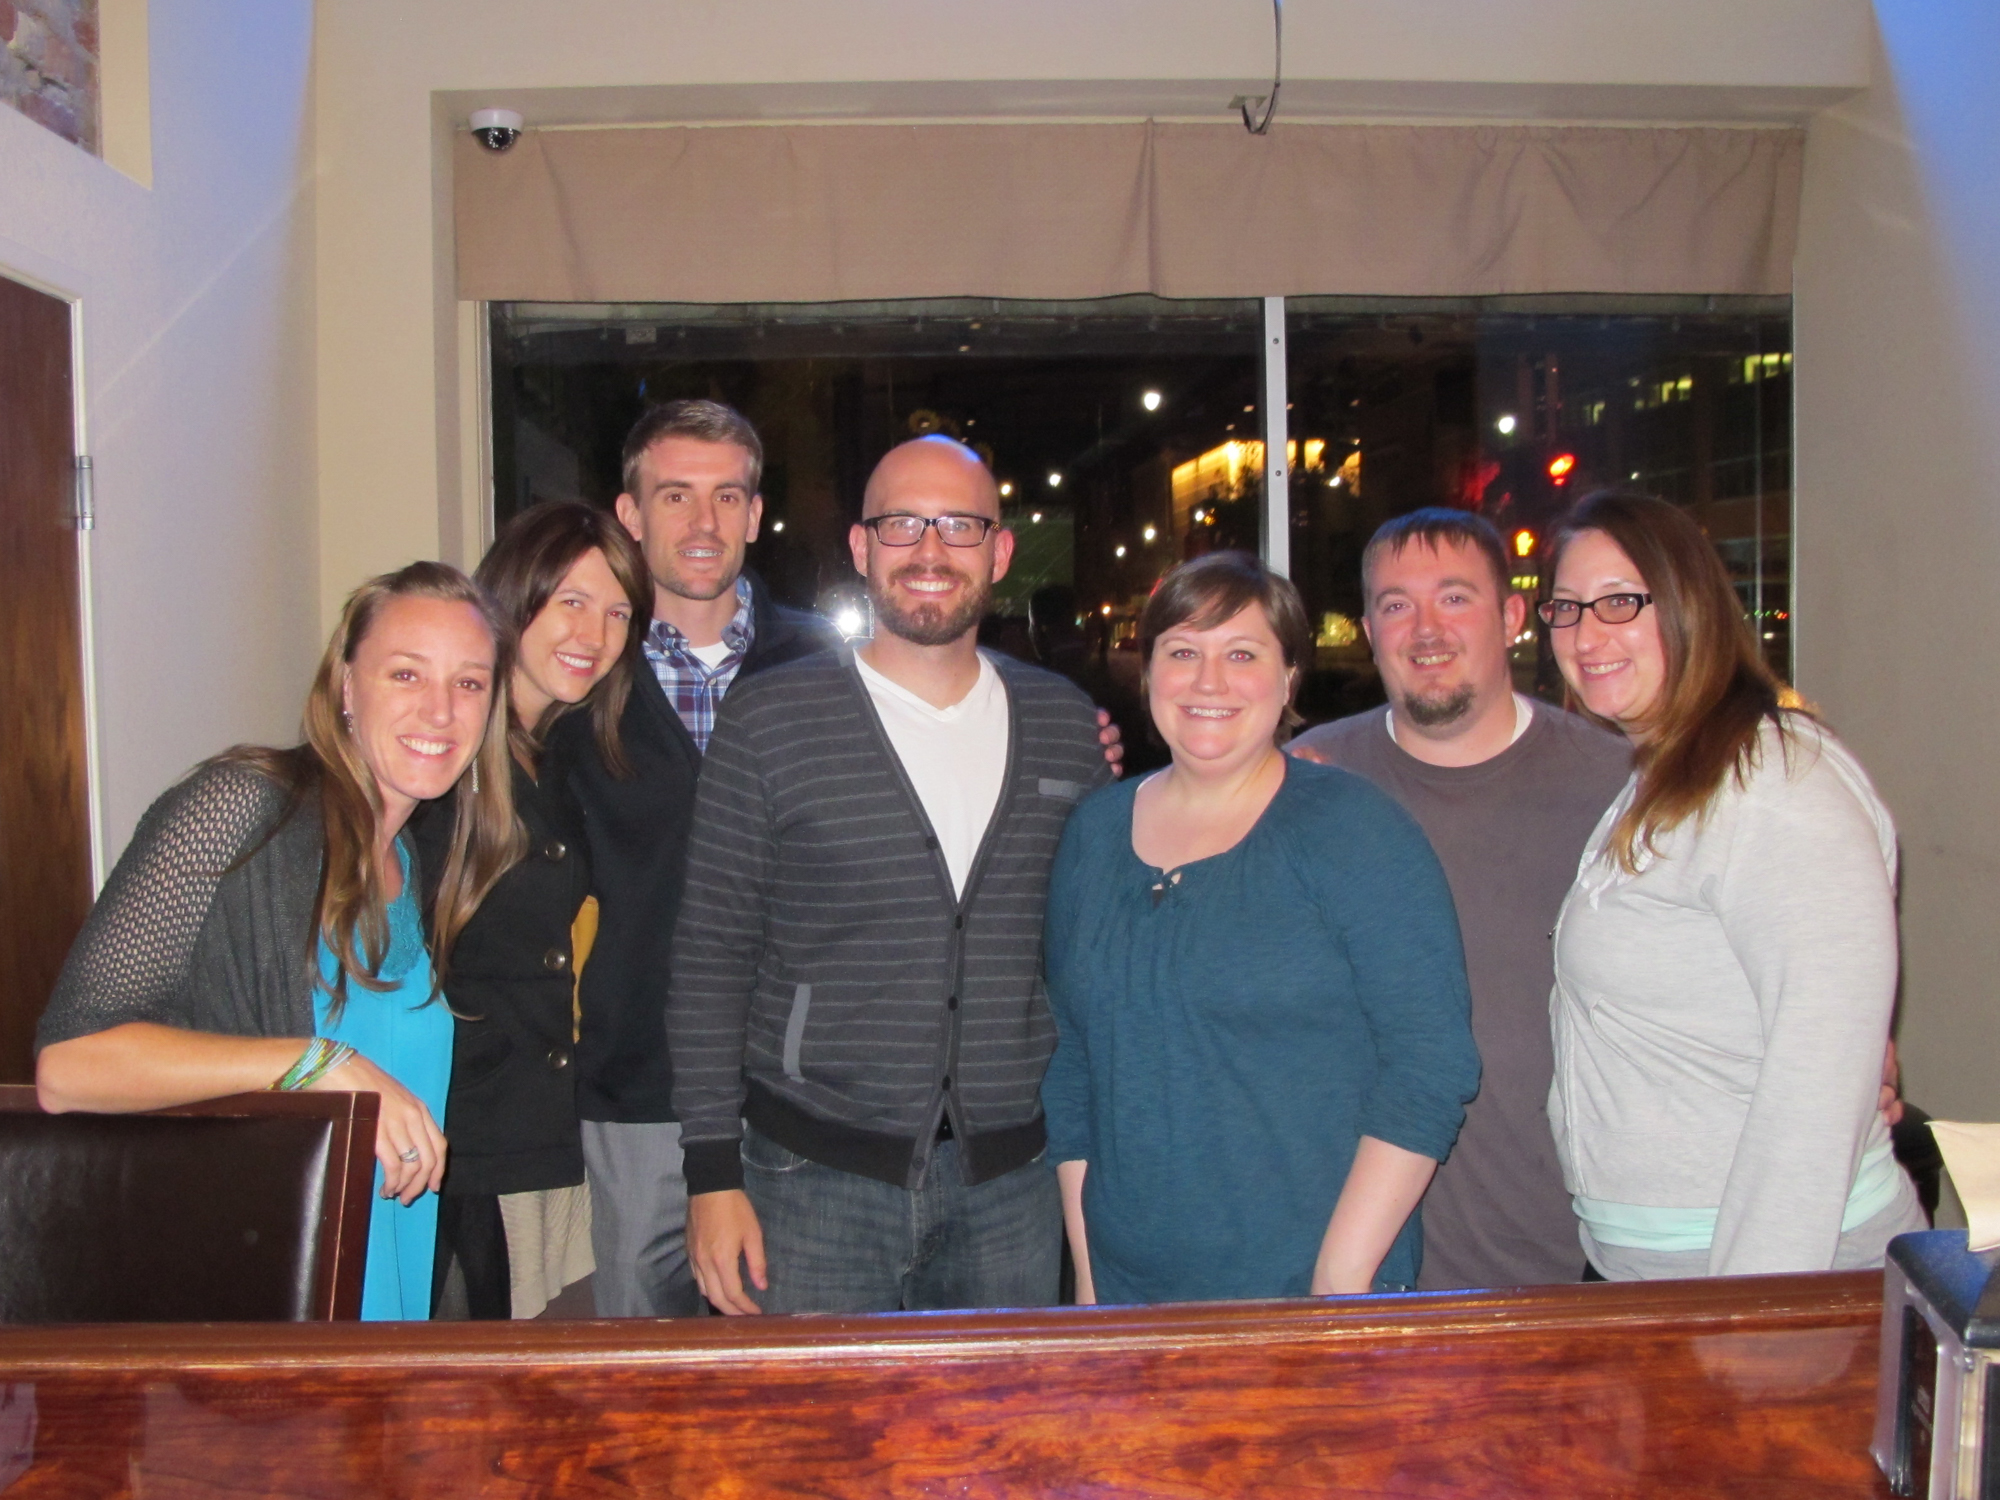  These are some of our favorite people! Sam &amp; Kyle, Bekah &amp; Steve and Nicole. We love them all! 